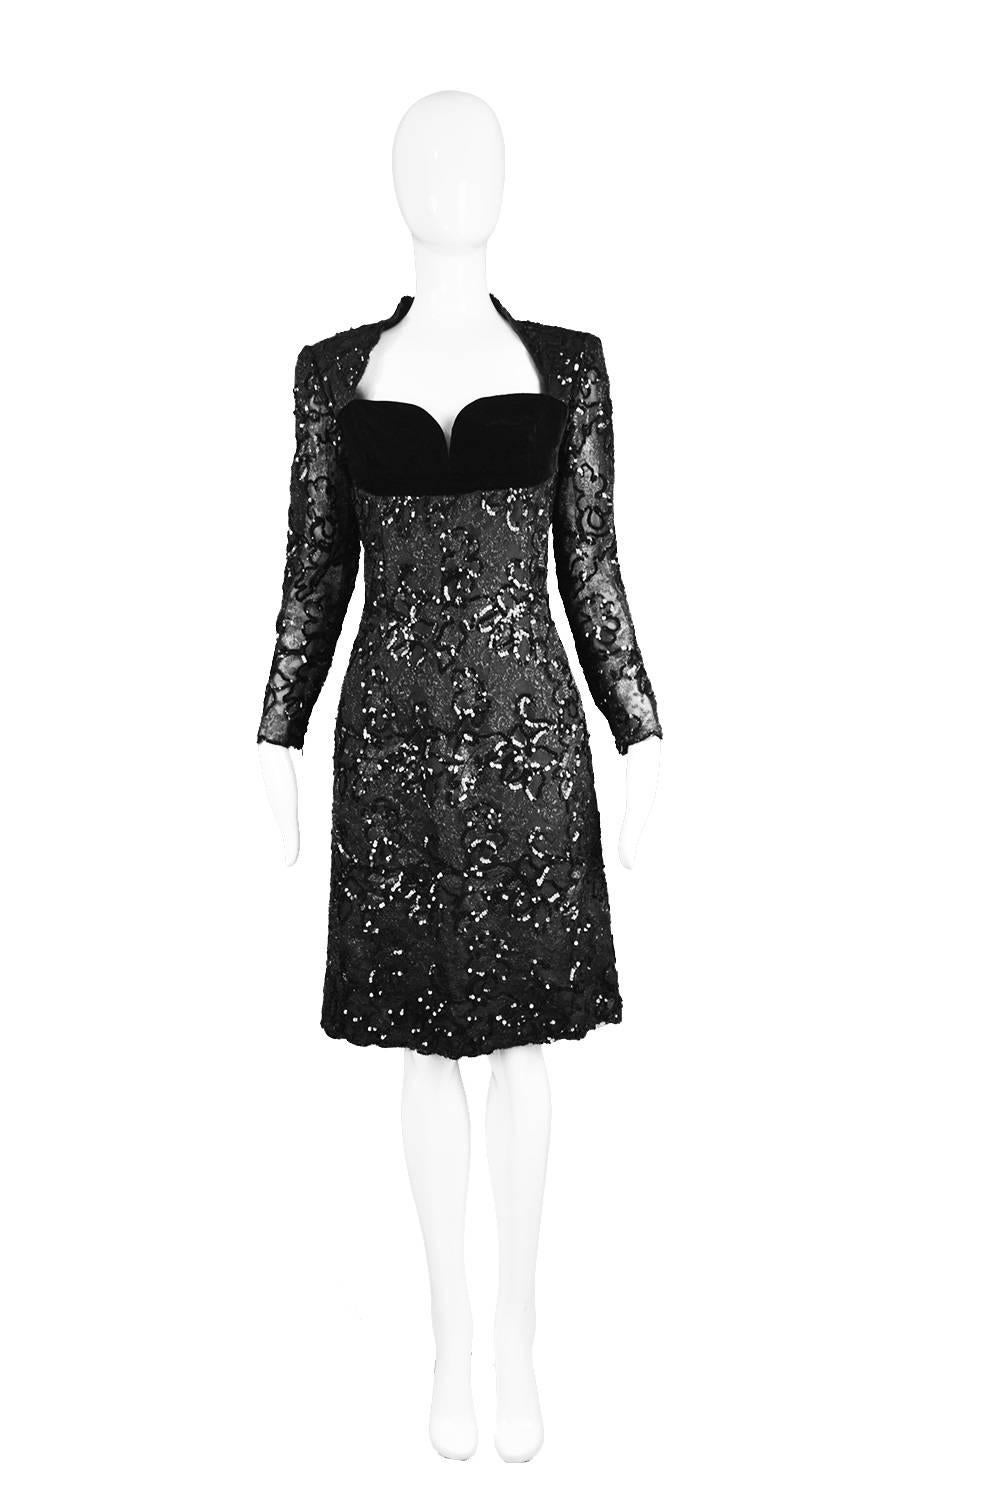 A sexy and elegant vintage Givenchy Couture dress from the Autumn Winter 1991 - 1992 collection. In an opulent black lace with beading and lame embellishments throughout and sheer sleeves for a truly classy look. The bust is black velvet glamorously